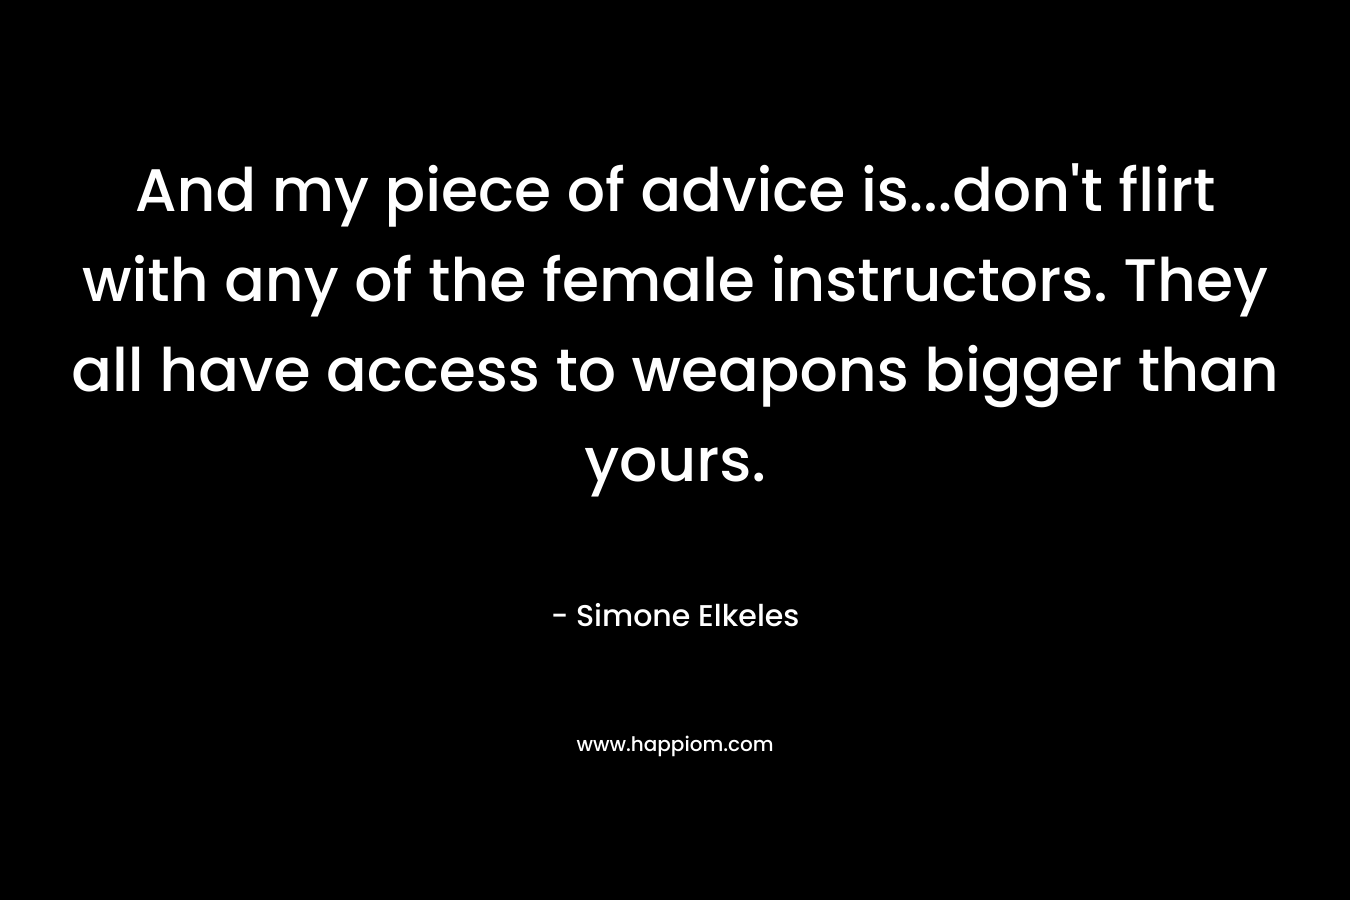 And my piece of advice is...don't flirt with any of the female instructors. They all have access to weapons bigger than yours.